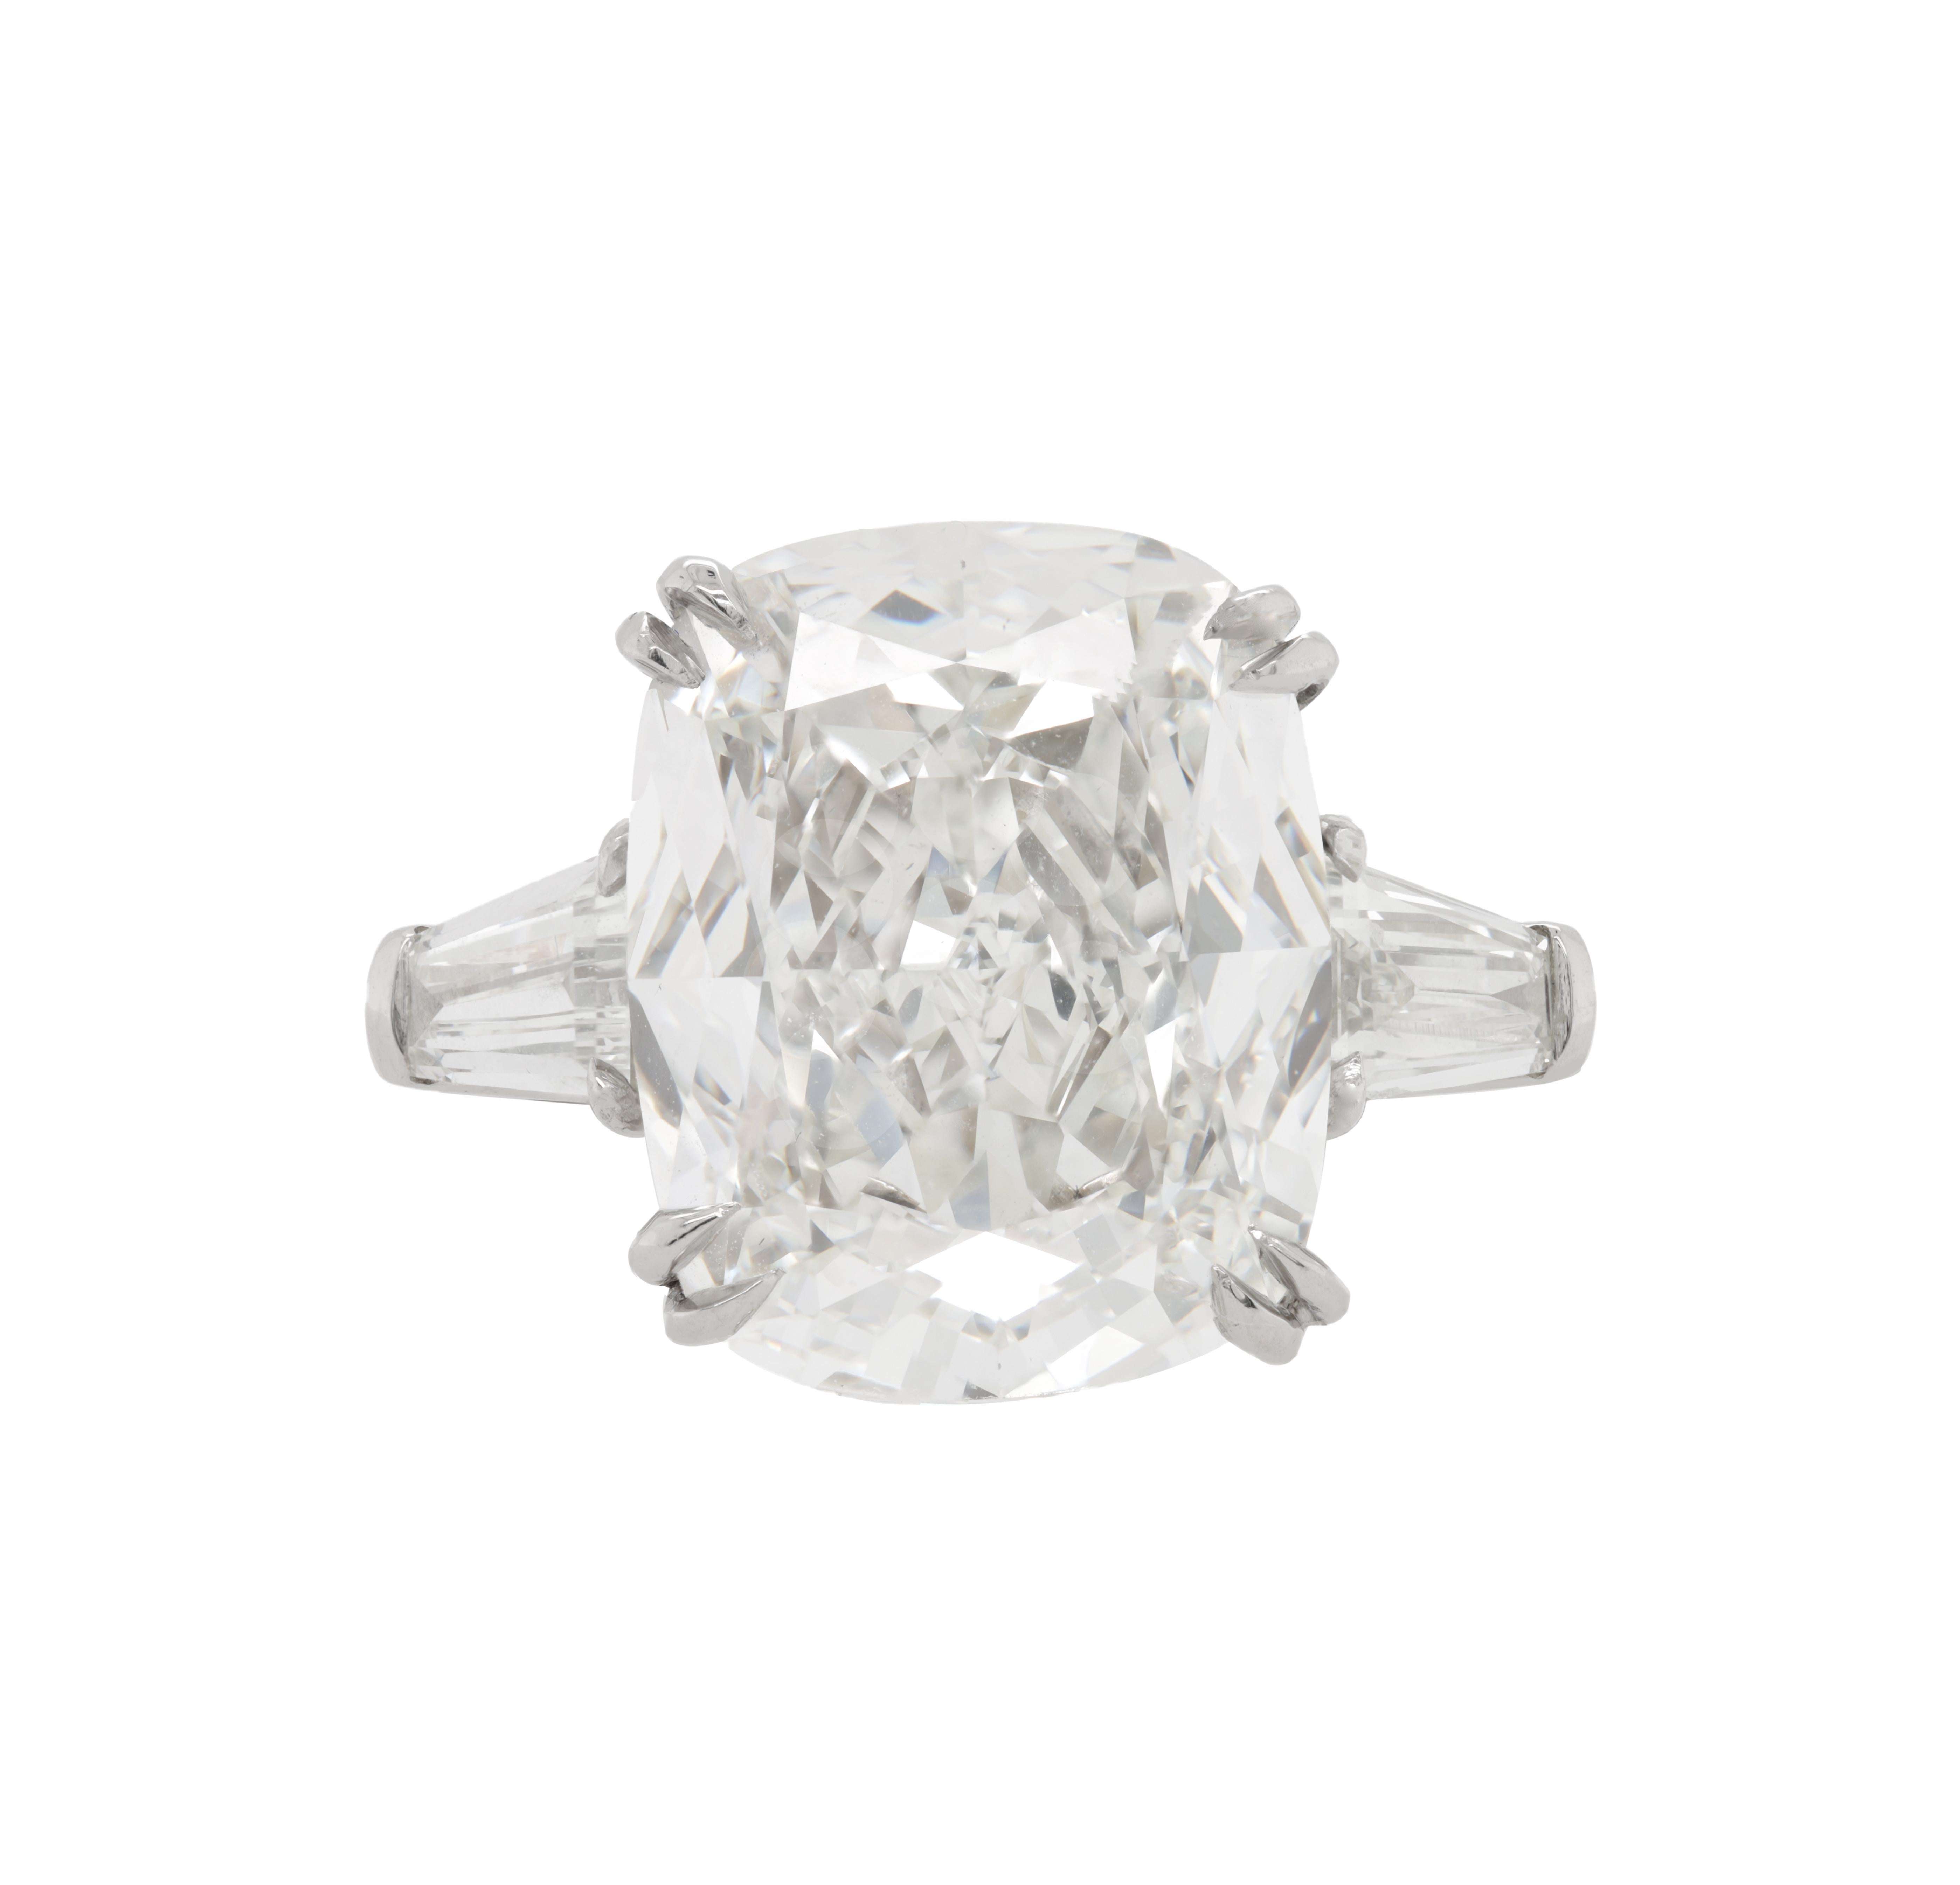 Platinum diamond ring with center cushion diamond 10.02ct h vs2 GIA (radc1085) with 2 trillions on side .92ct total 
